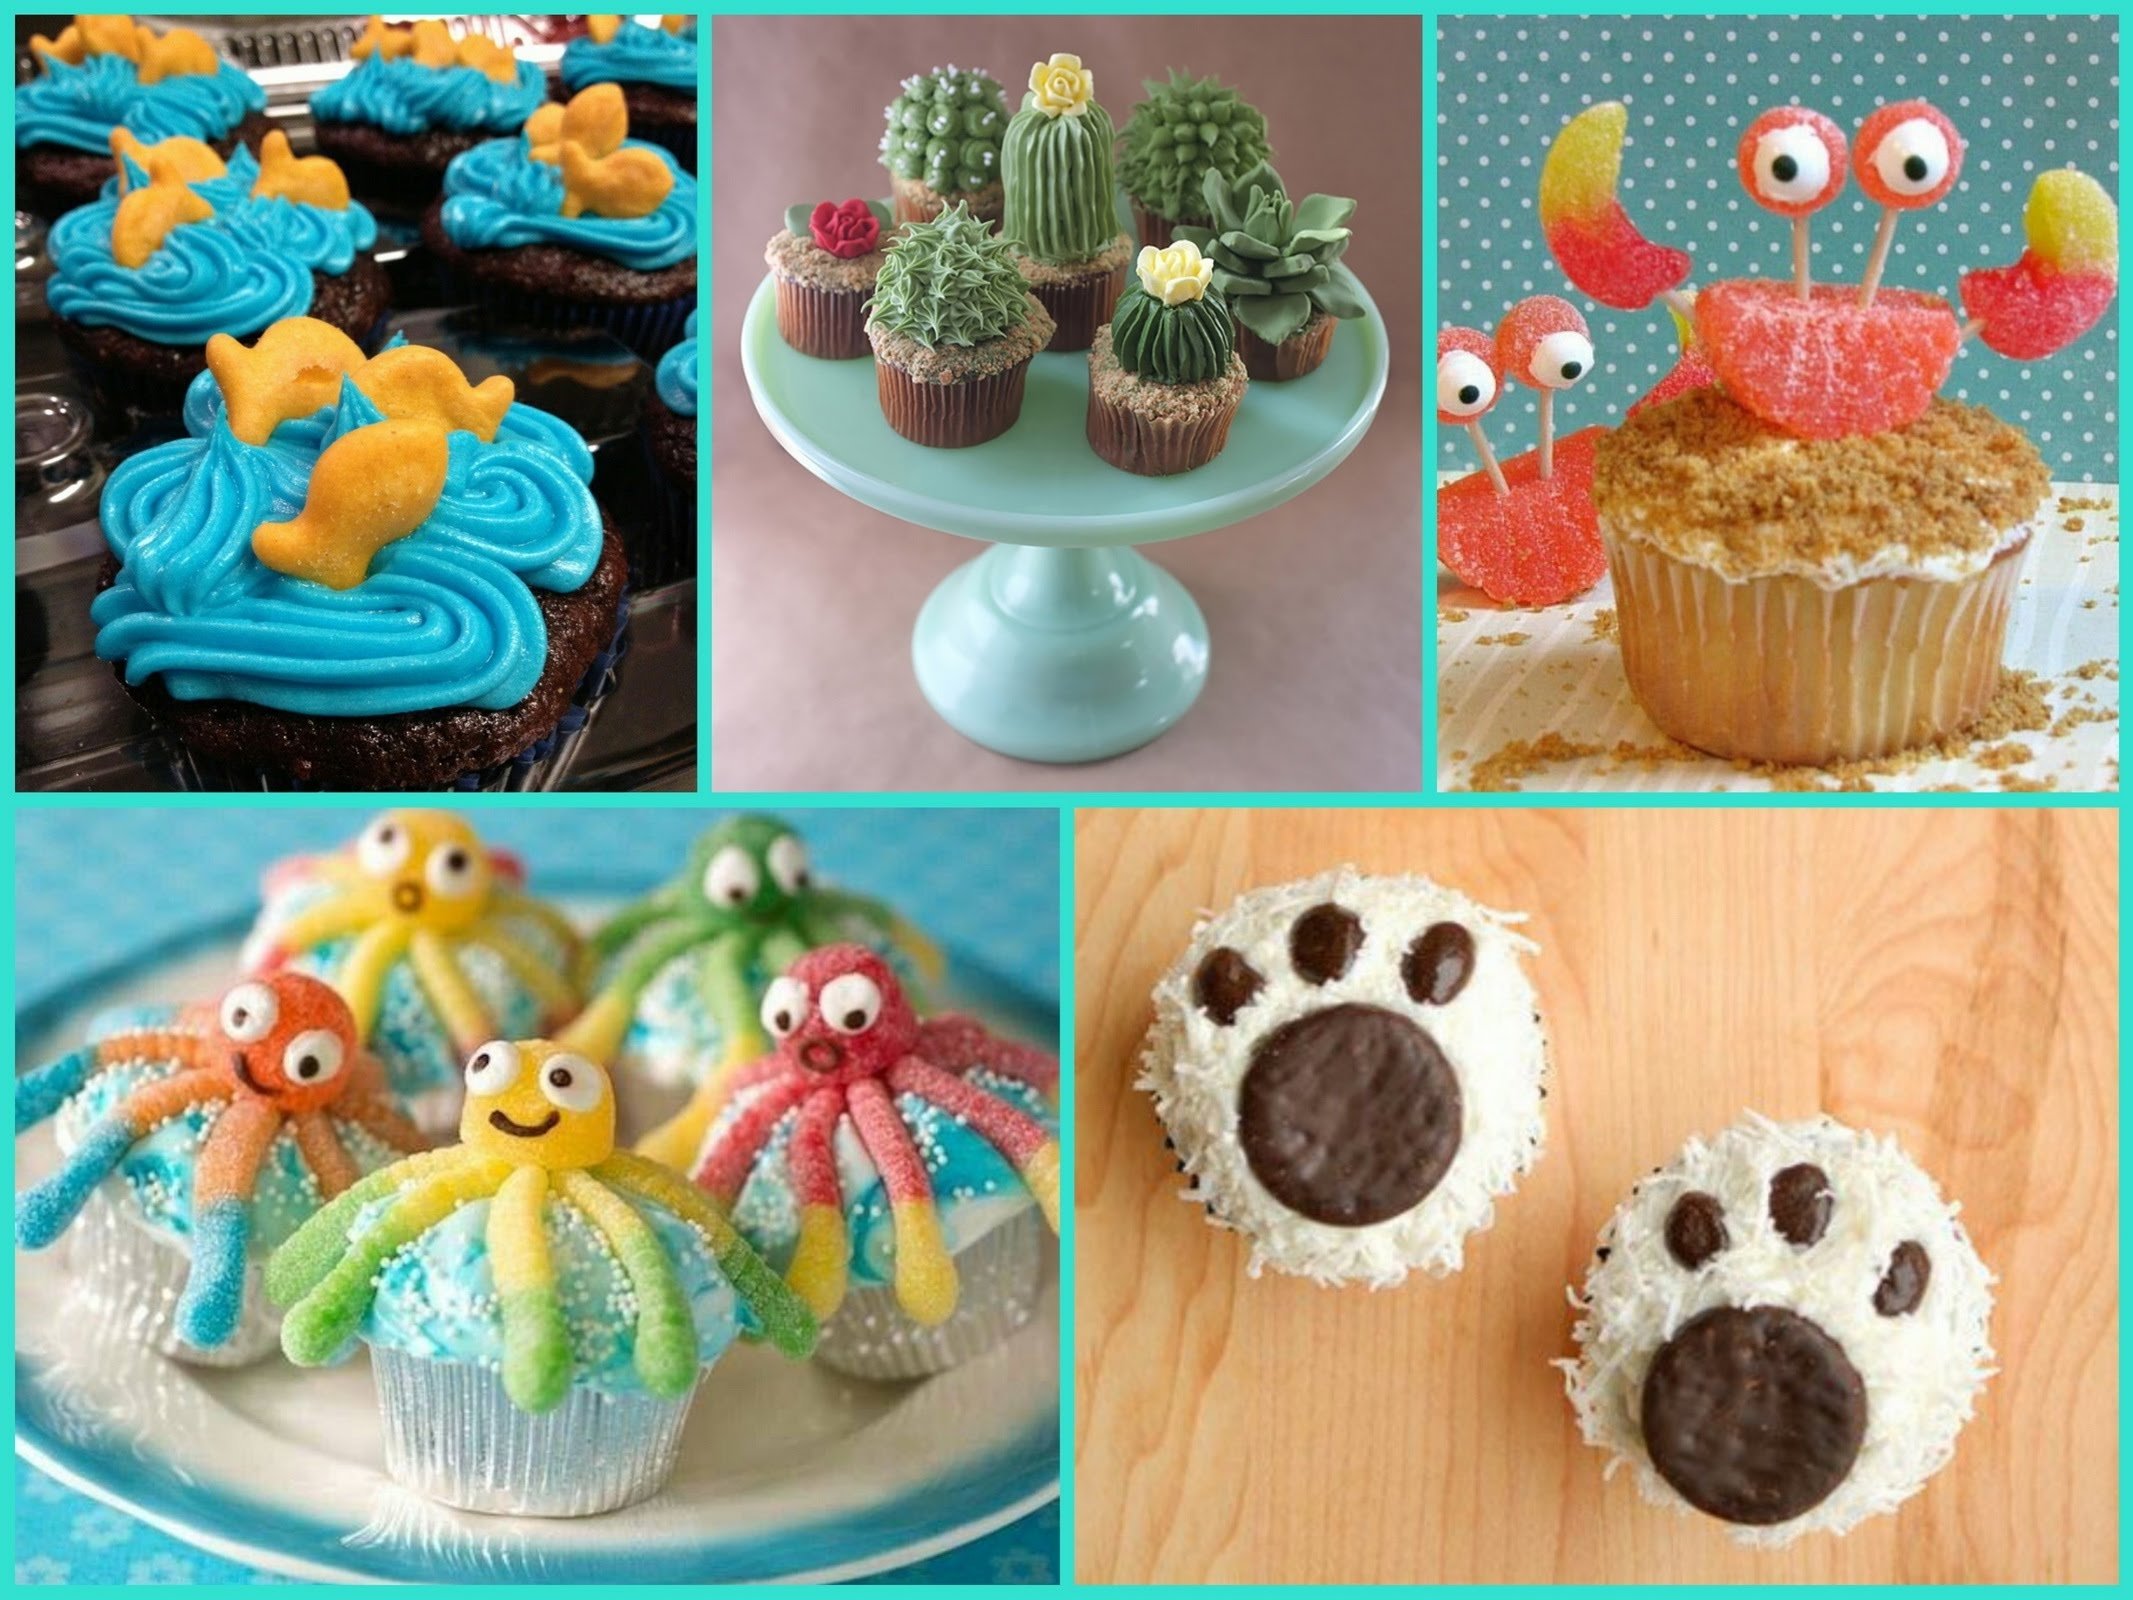 10 Attractive Cupcake Decorating Ideas For Kids easy cupcake decorating ideas tips tricks youtube 2023